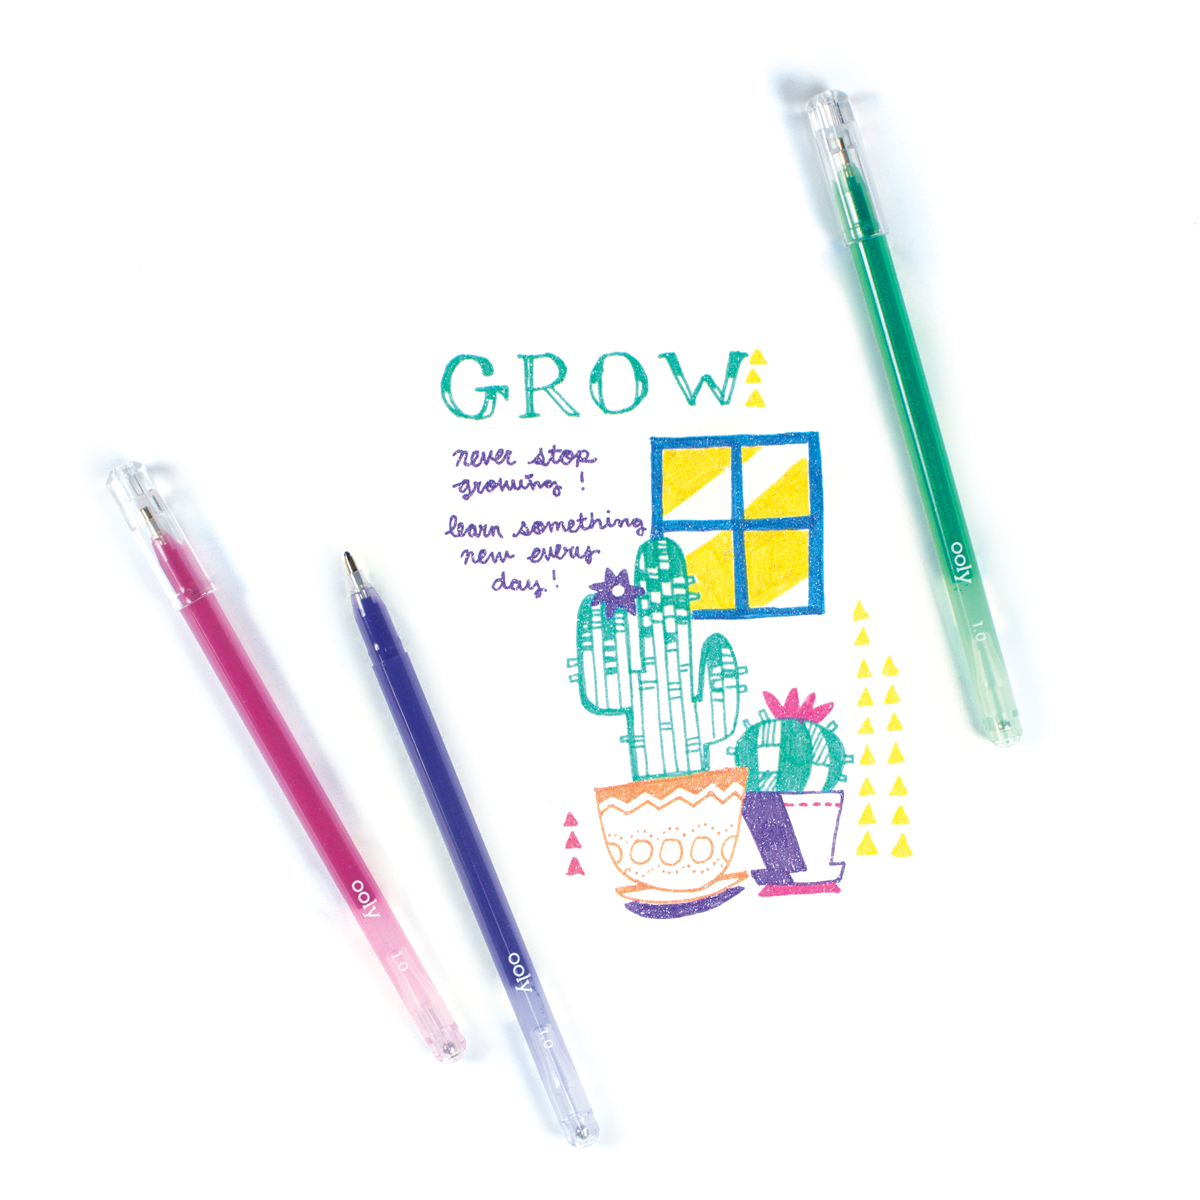 "Grow" message and drawing made with Radiant Writers glitter gel pens